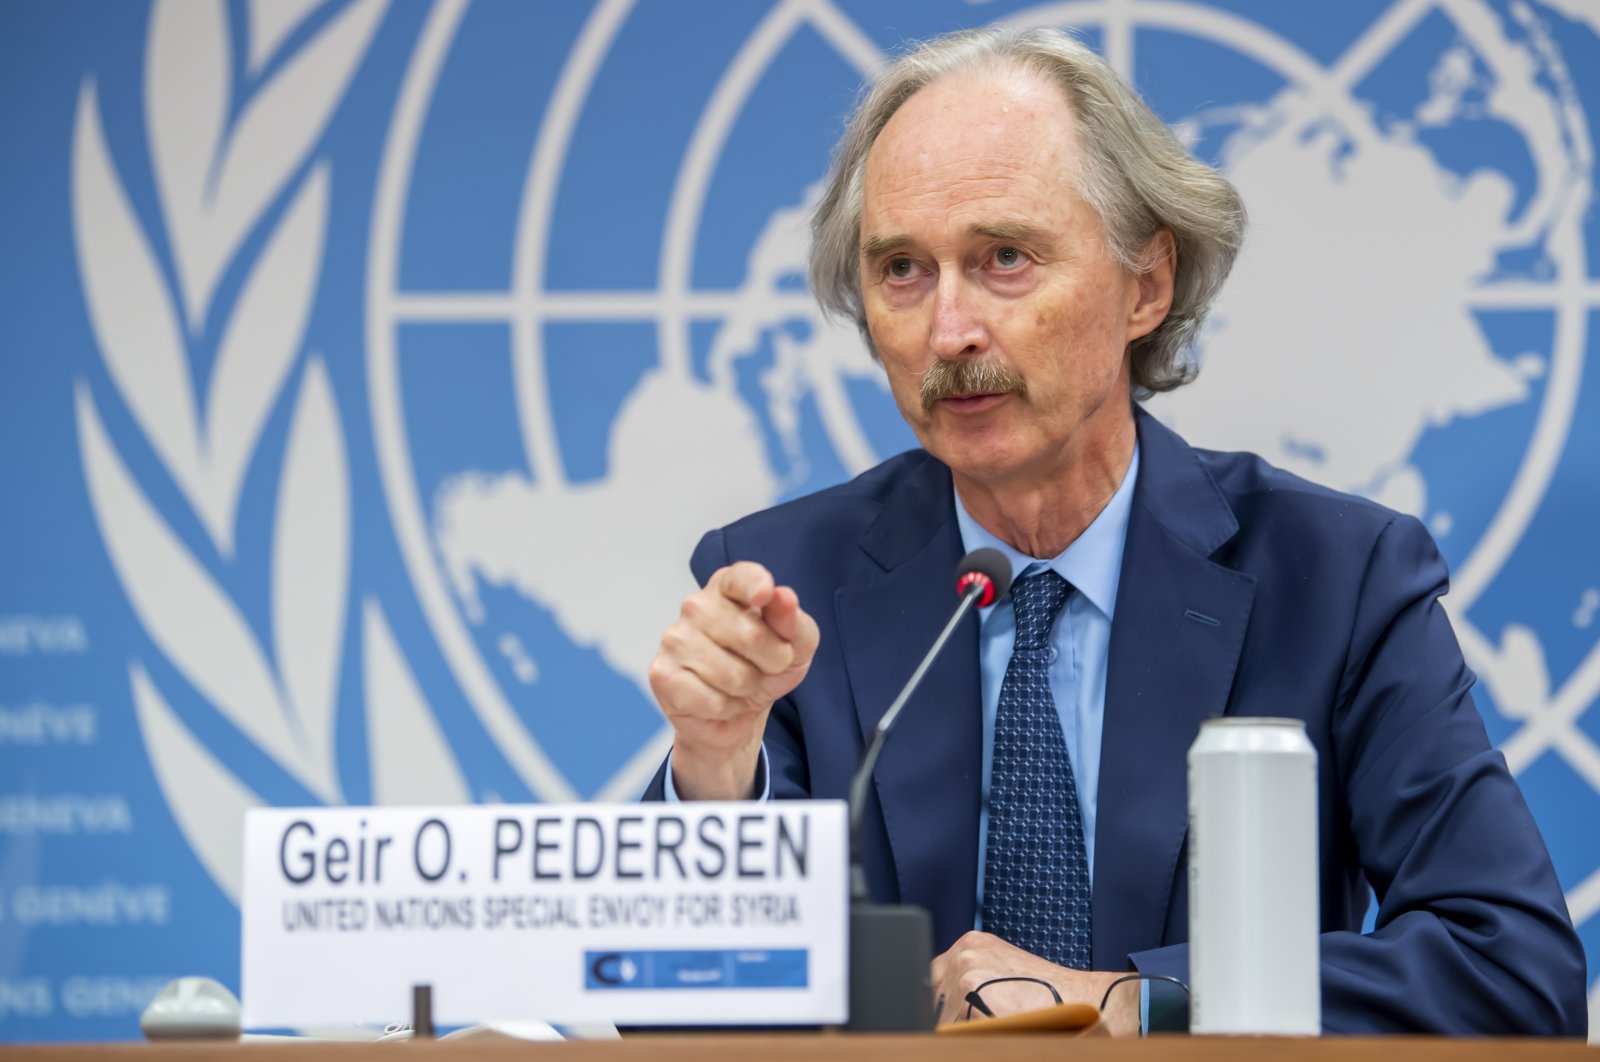 Geir Pedersen, U.N. Special Envoy for Syria, speaks to the media about the sixth session of the Constitutional Committee Small Body, during a press conference at the European headquarters of the United Nations in Geneva, Switzerland, 17 October 2021.  EPA/MARTIAL TREZZINI